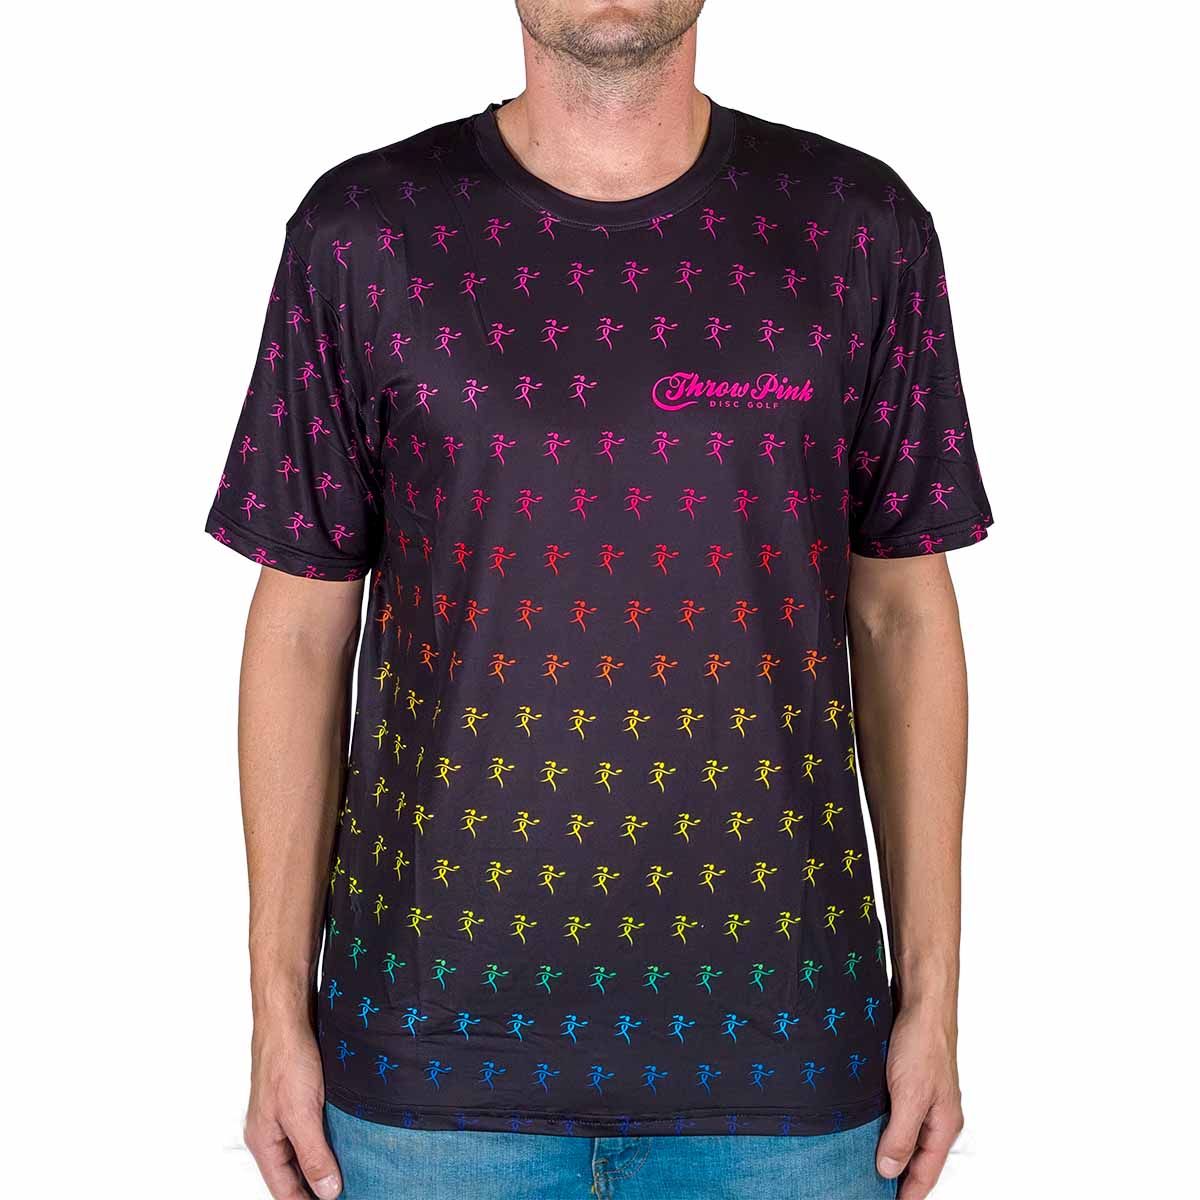 Throw Pink Unisex Fusion Jersey from Disc Golf United